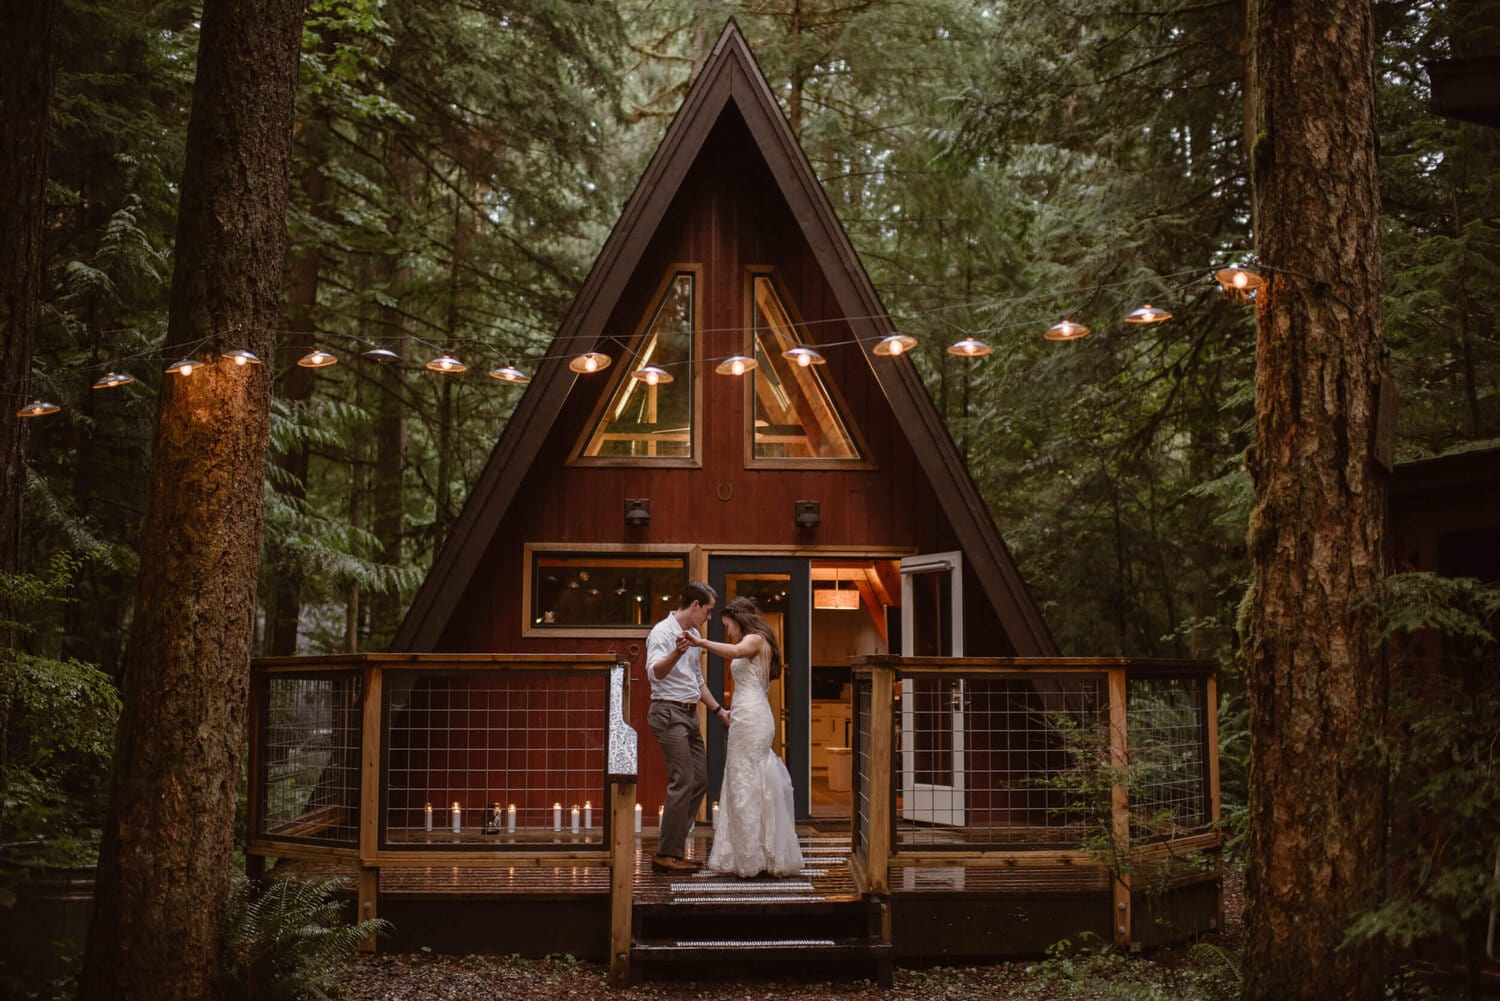 Bride and groom stand in front of an Airbnb treehouse for their wedding.